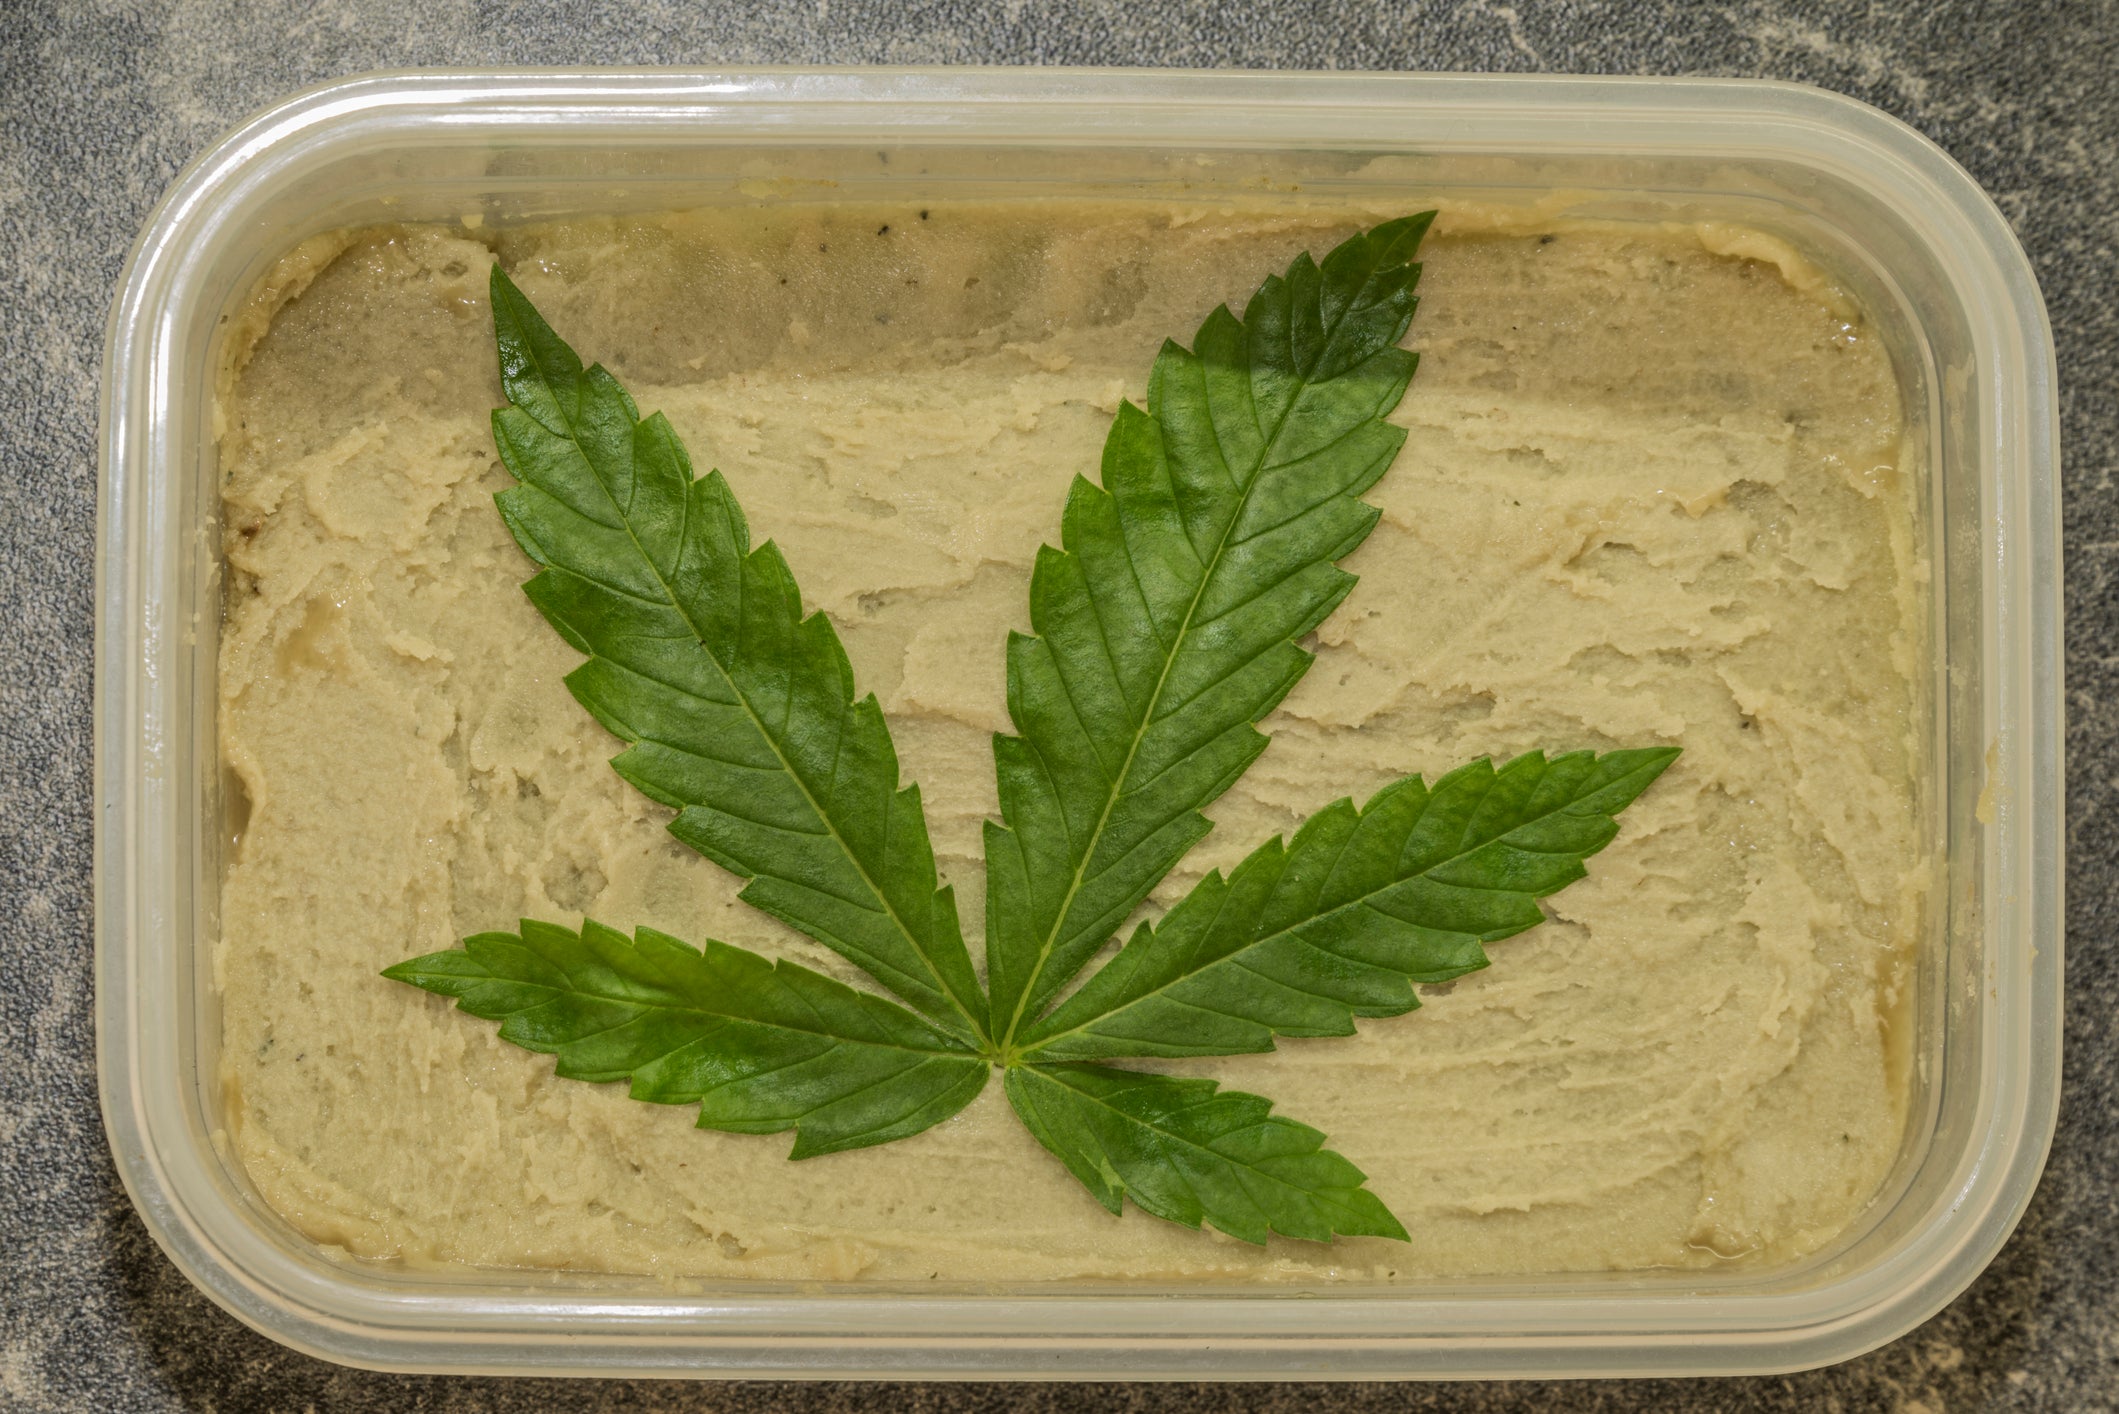 Cannabutter in a plastic container has a cannabis leaf on top of it and will be used to make cannabis edibles.